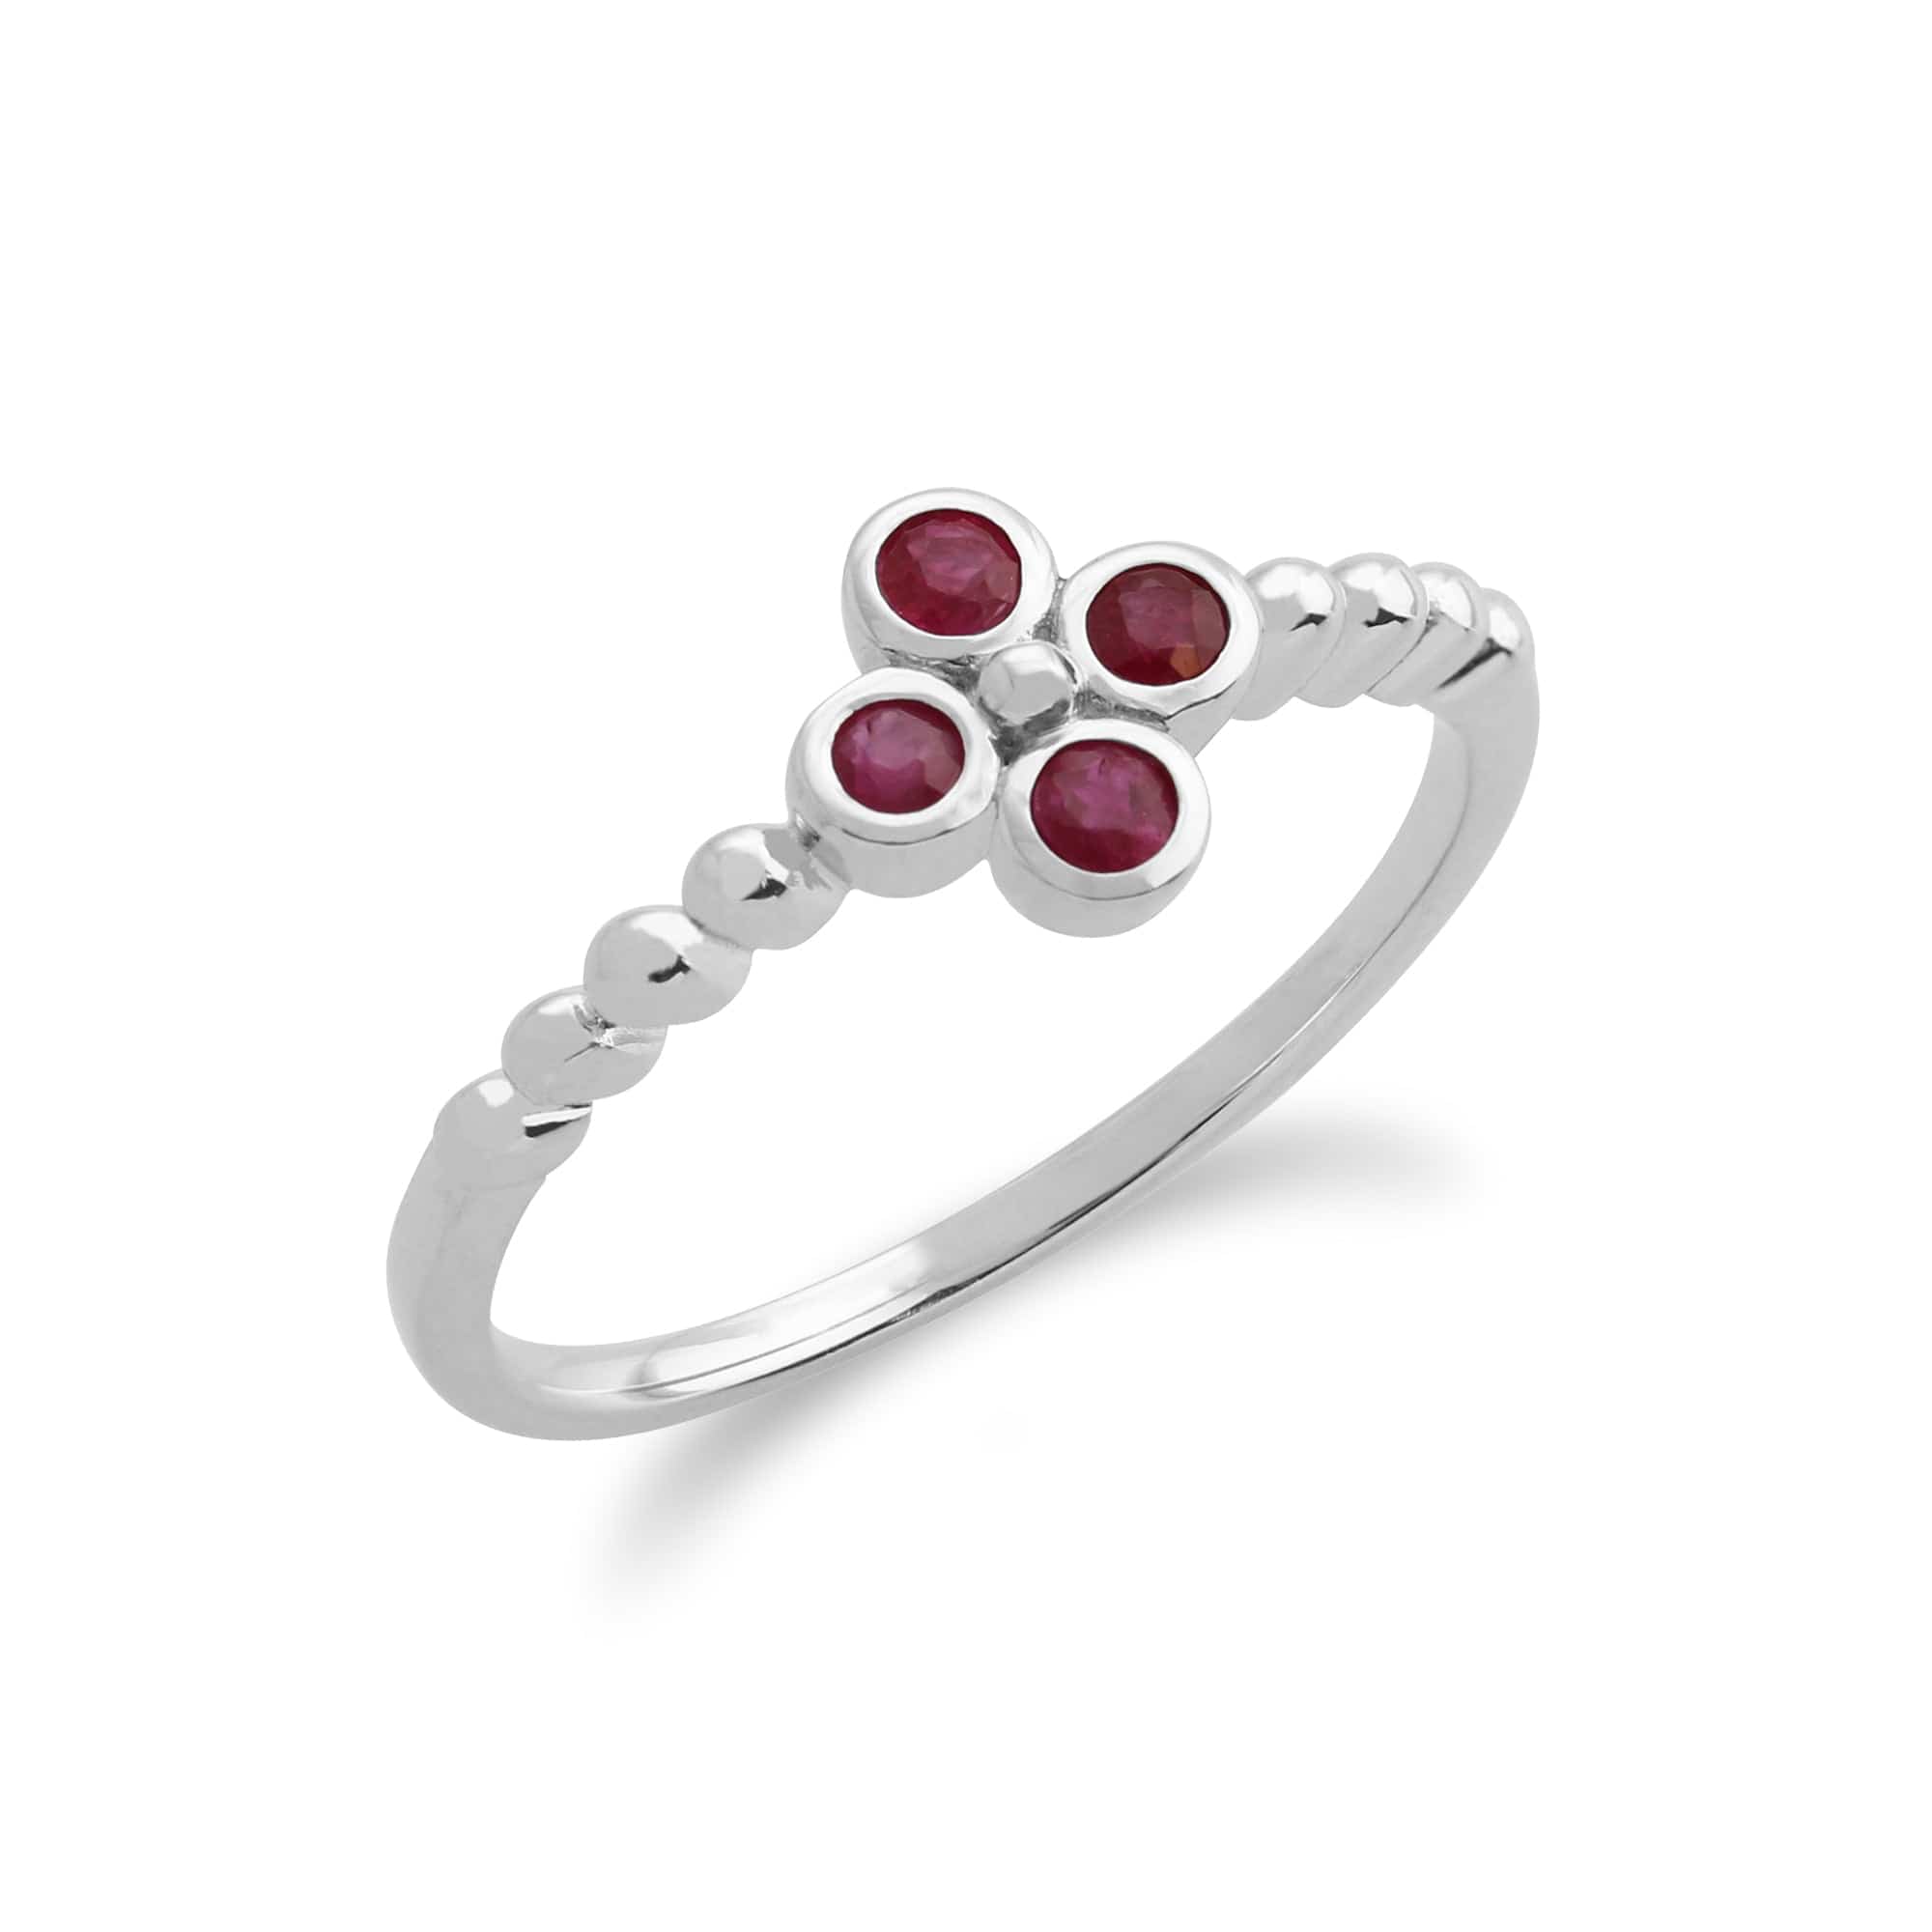 Floral Round Ruby Clover Stud Earrings & Ring Set in 925 Sterling Silver - Gemondo